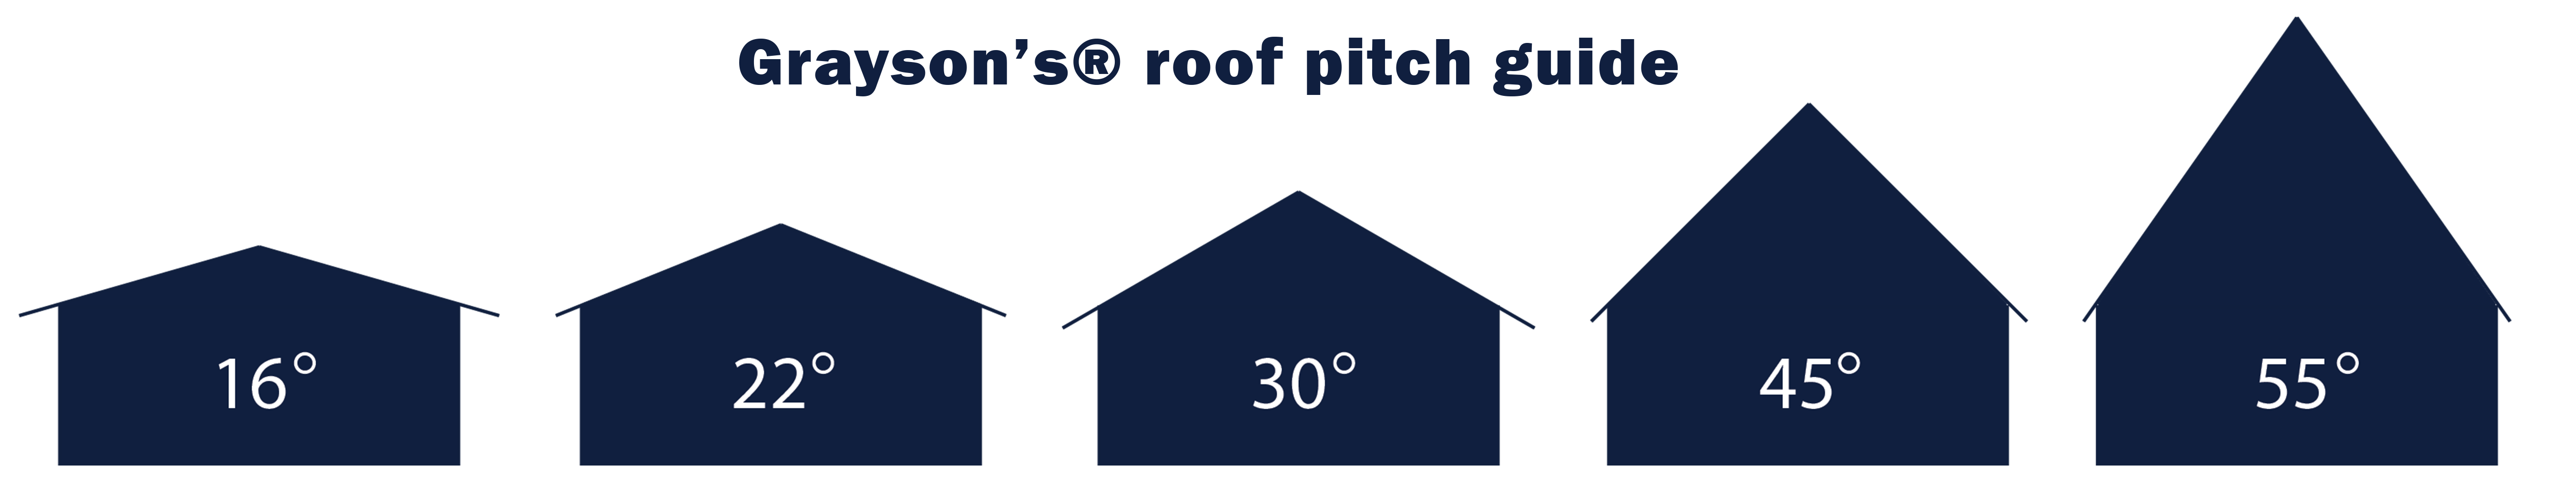 Grayson's Gutter Guard Roof Pitch Guides